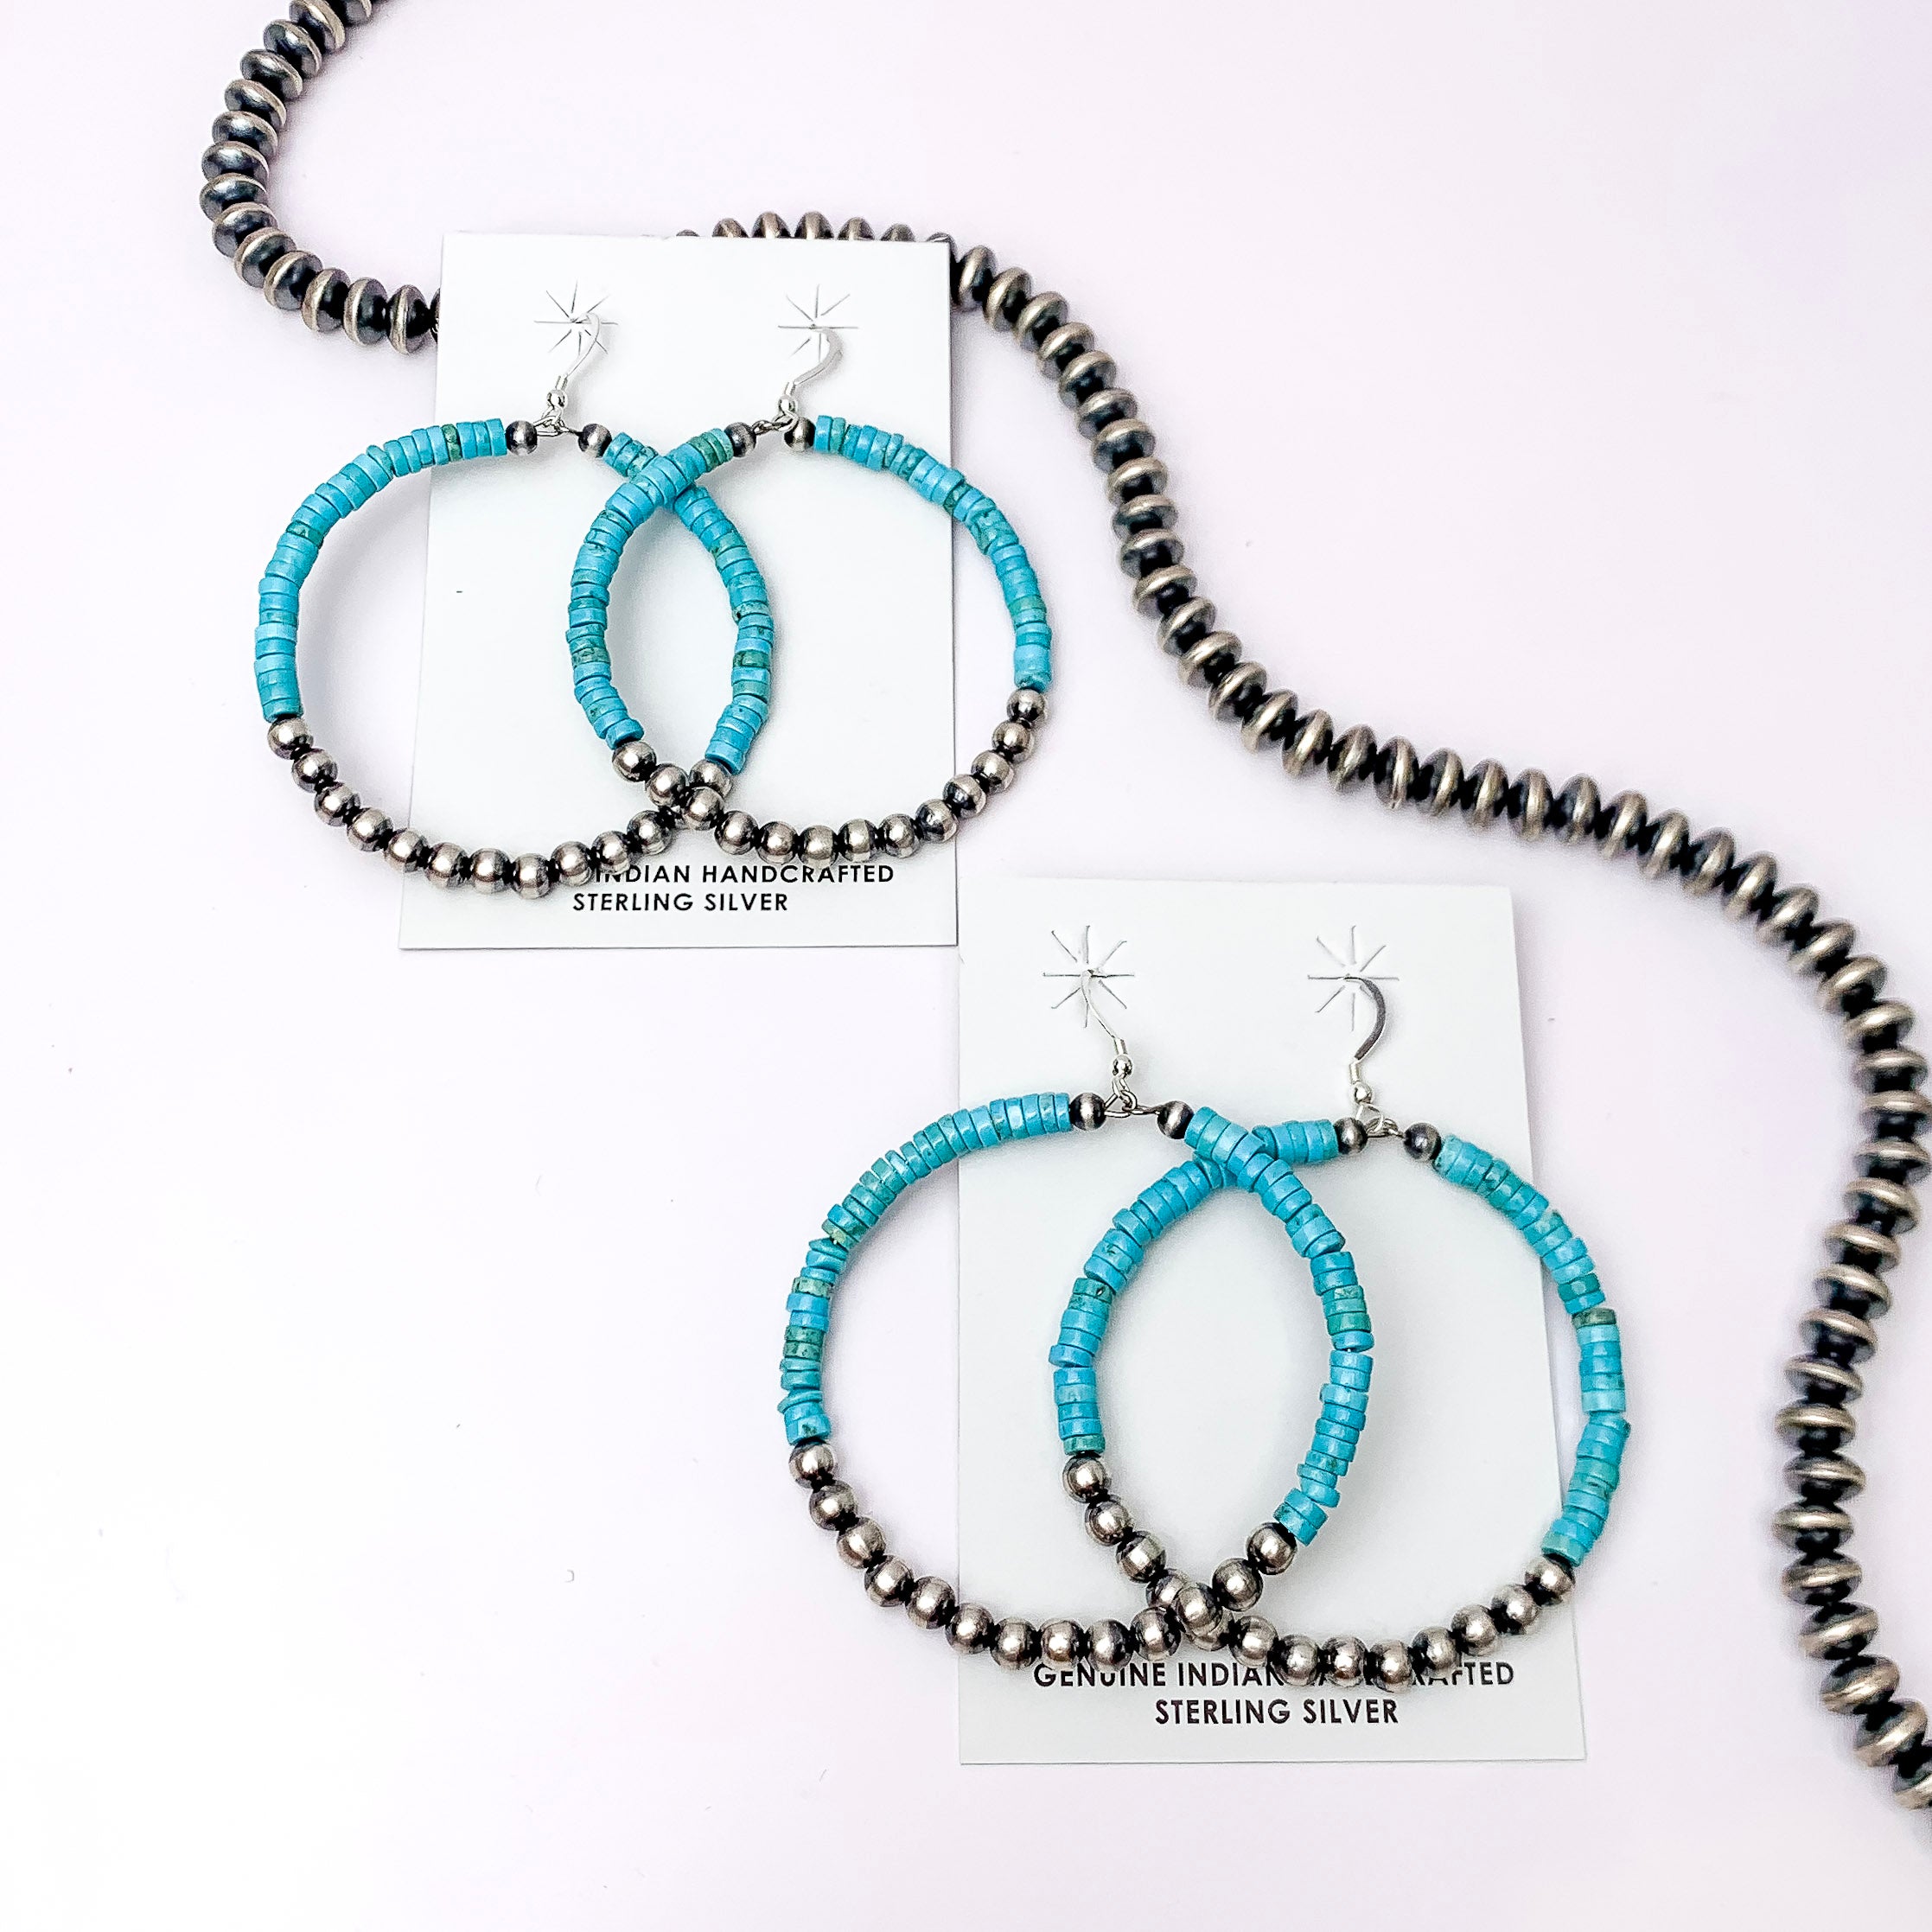 Centered in the picture is 2 pair of navajo and turquoise hoops on a white background. 